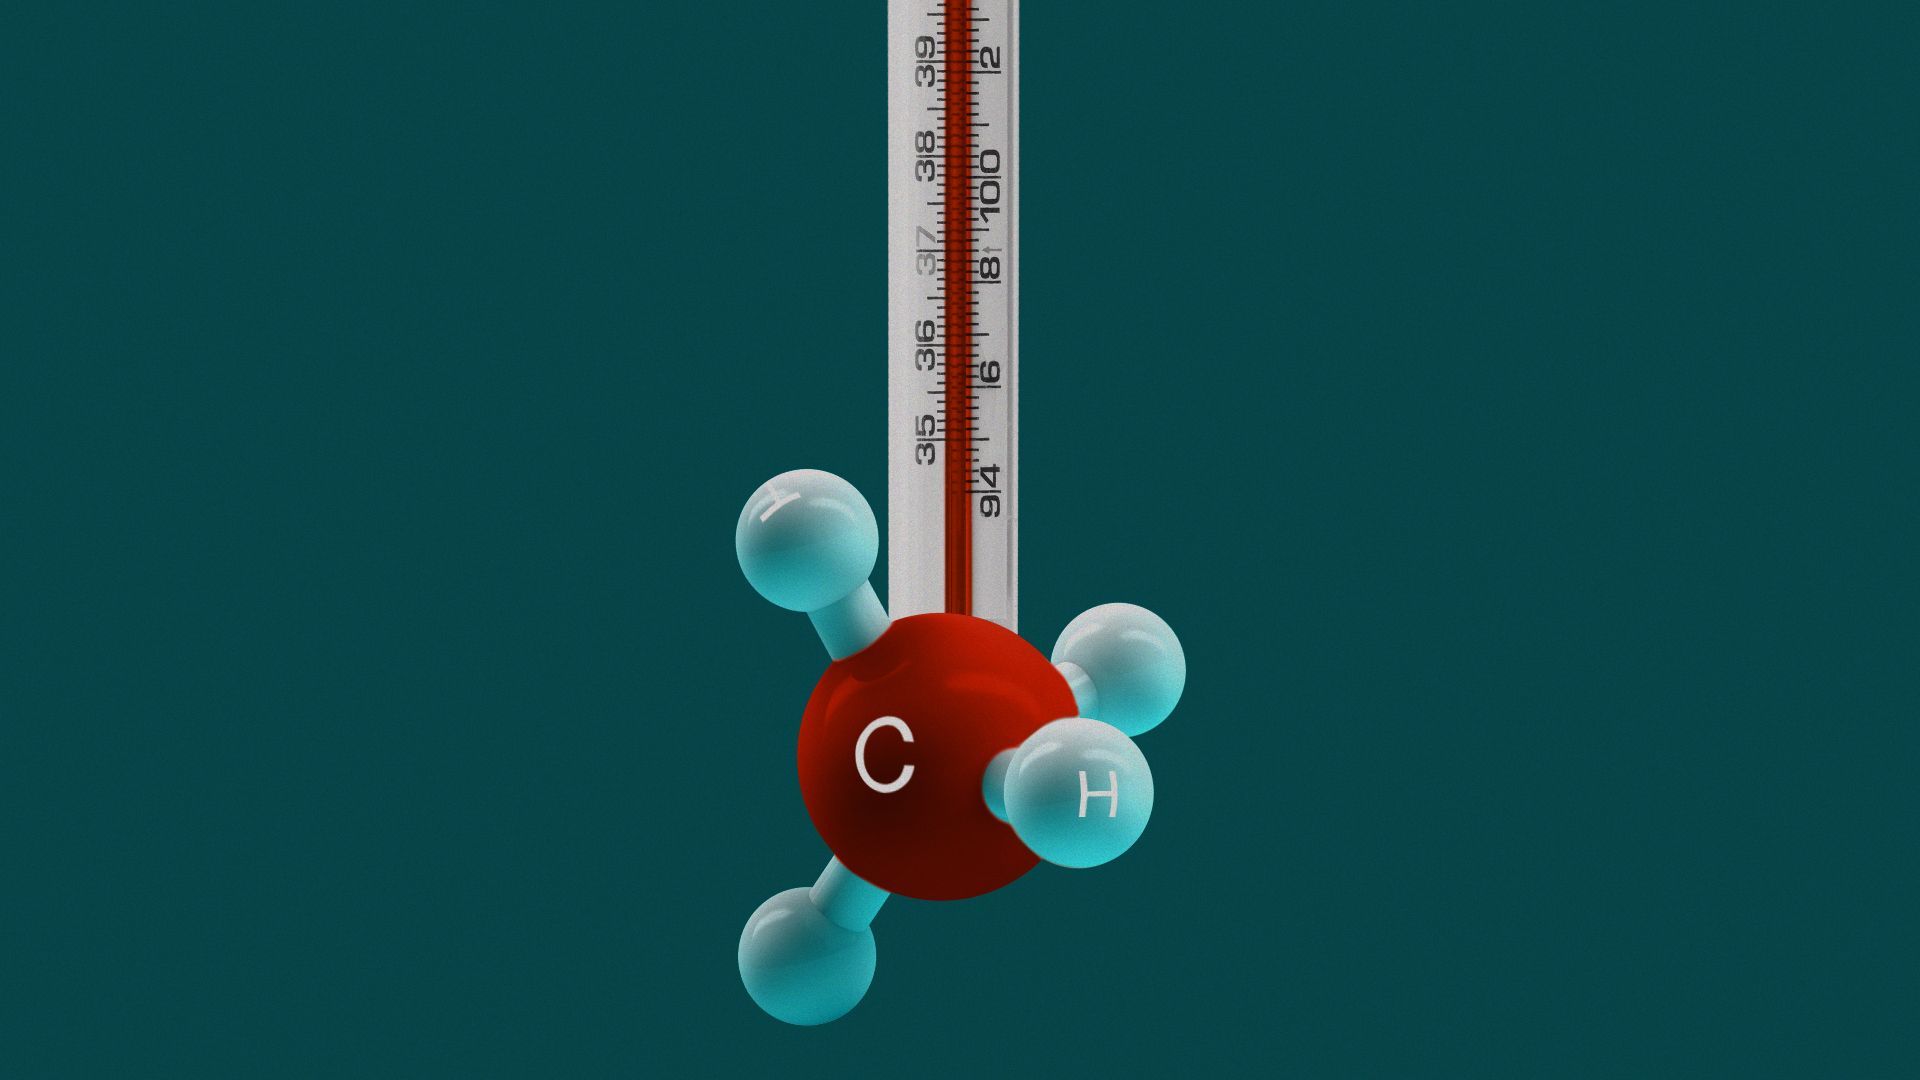 Illustration of a thermometer with a methane molecule as the base.